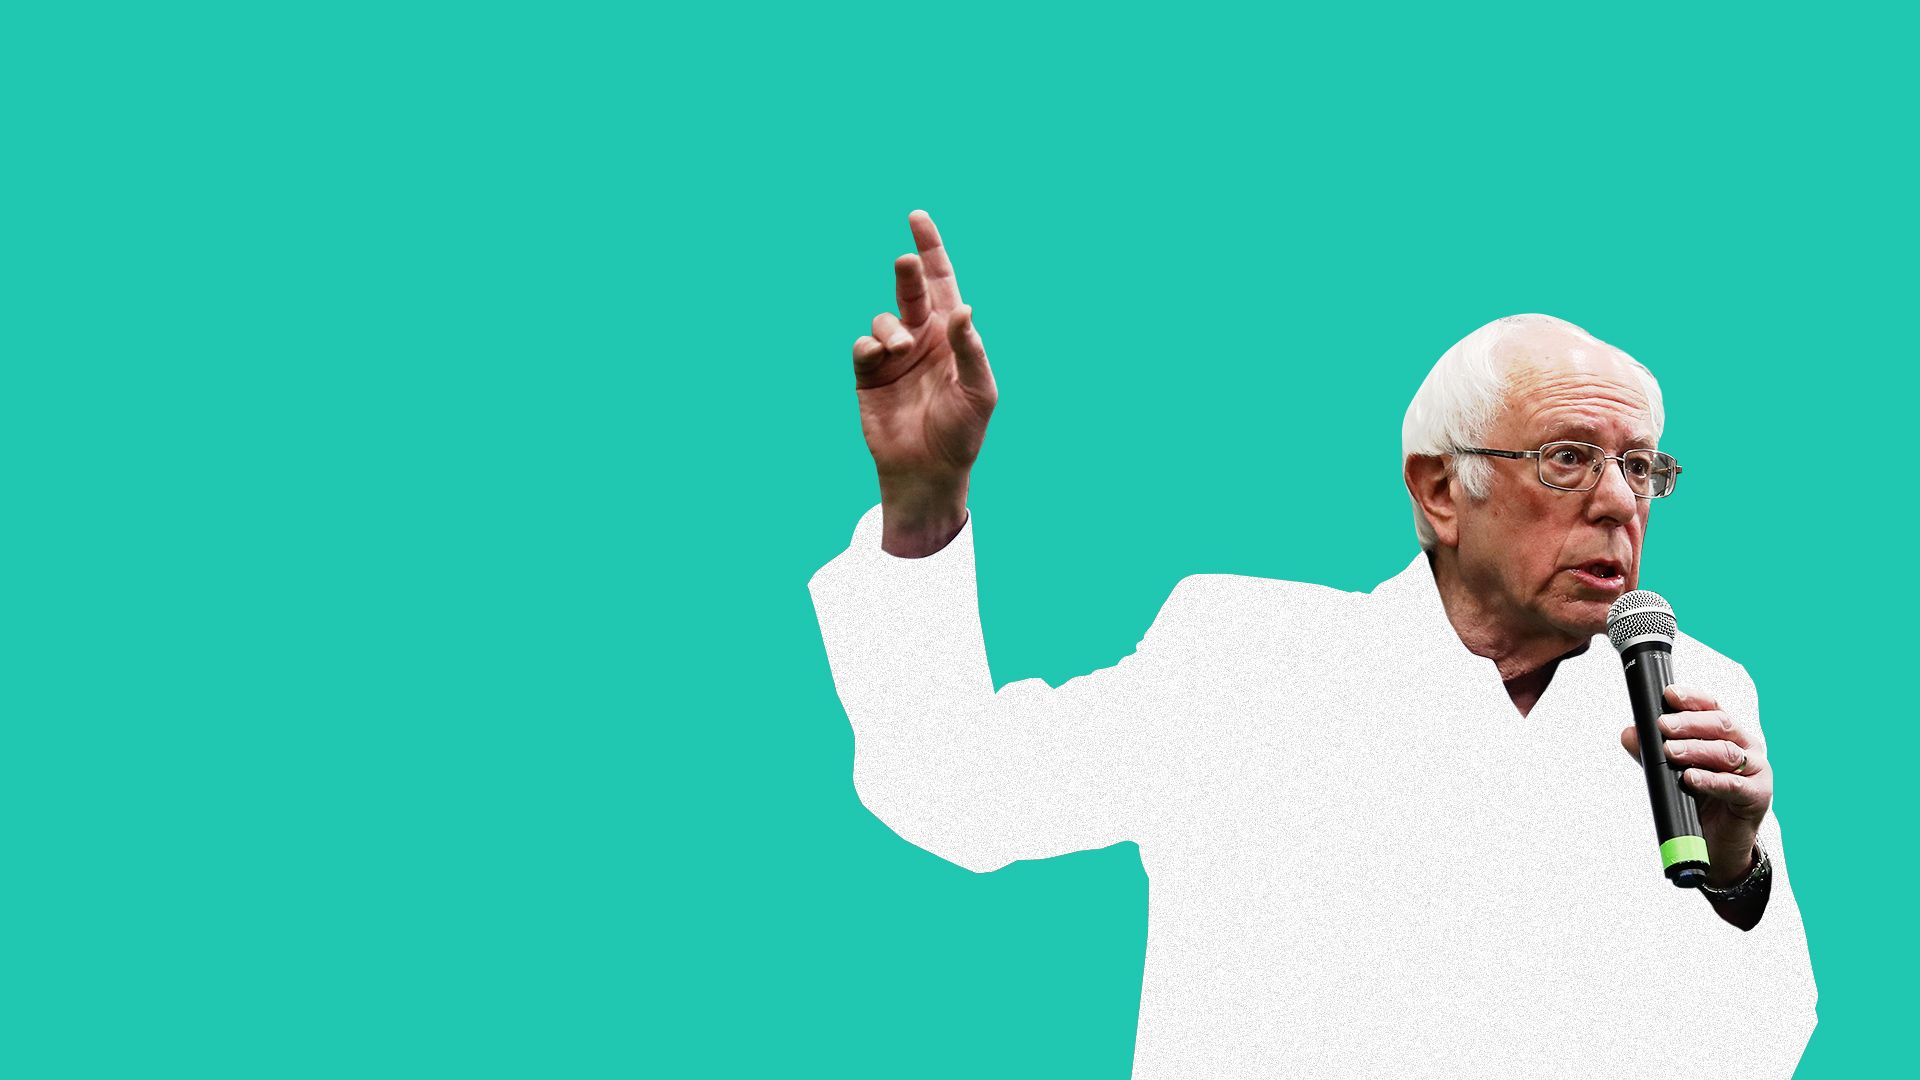 Photo illustration of Bernie Sanders gesturing and holding a microphone